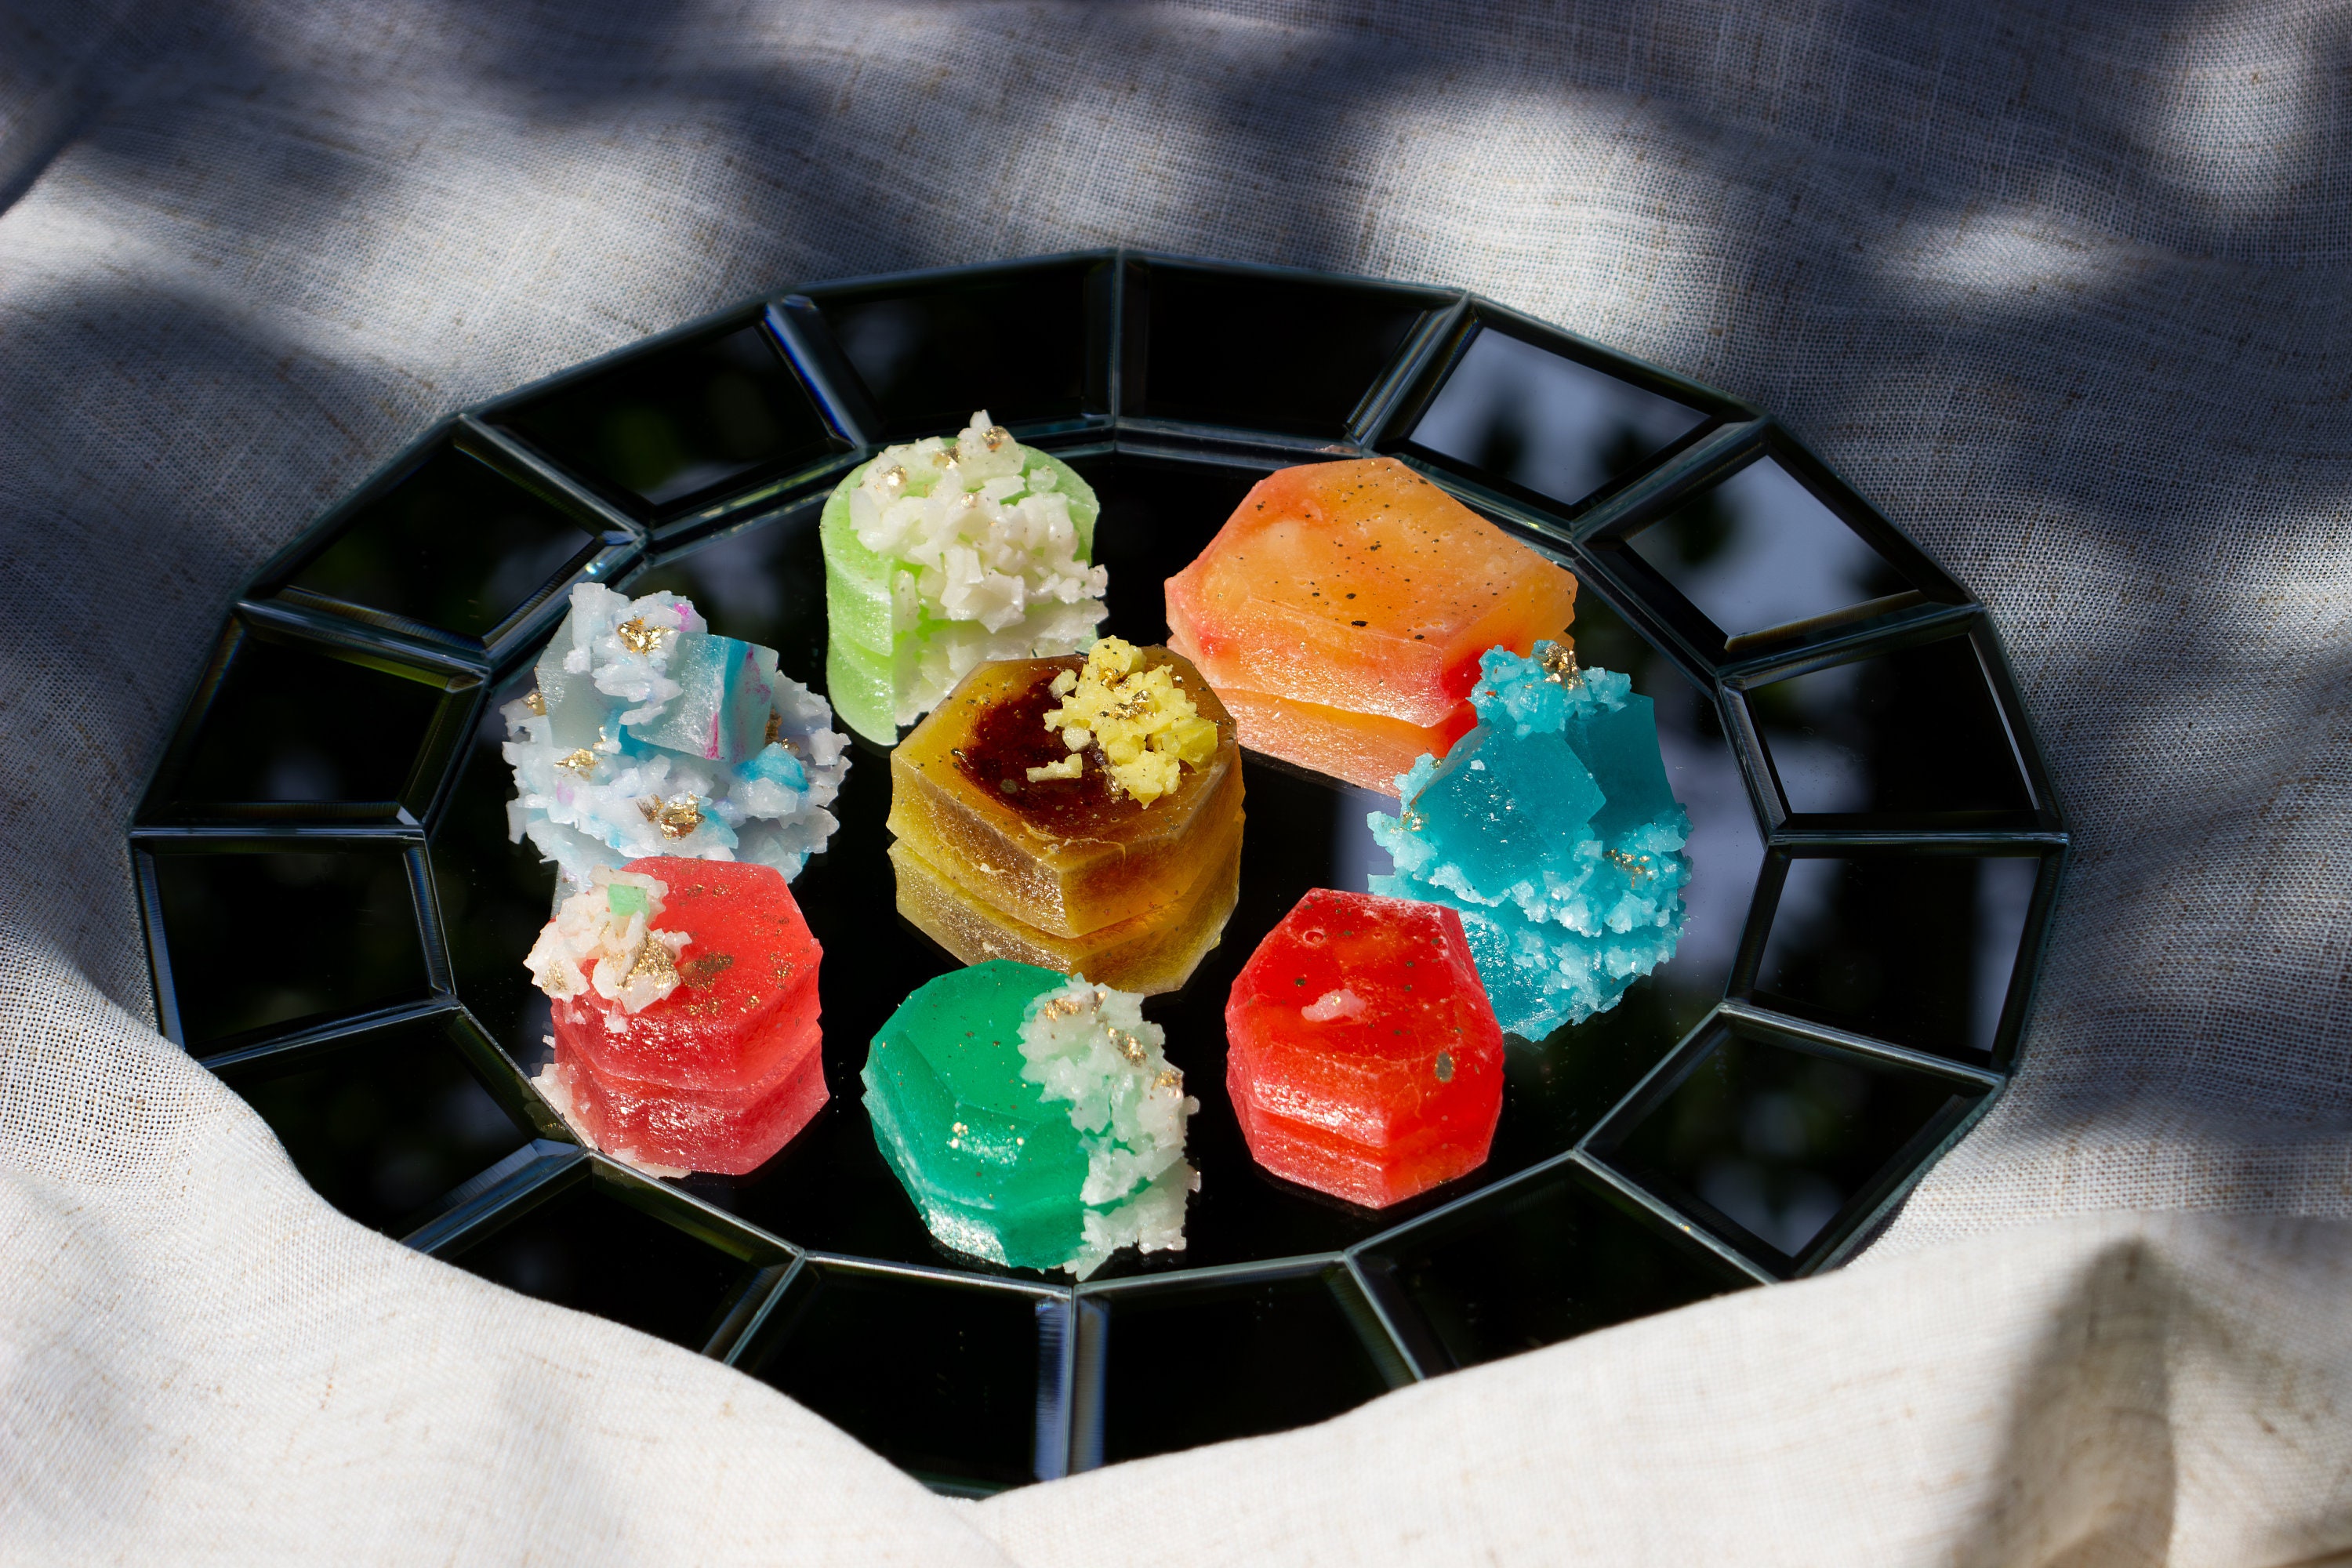 Kohakutou (Japanese crystal candy) Recipe - flavored with Juice